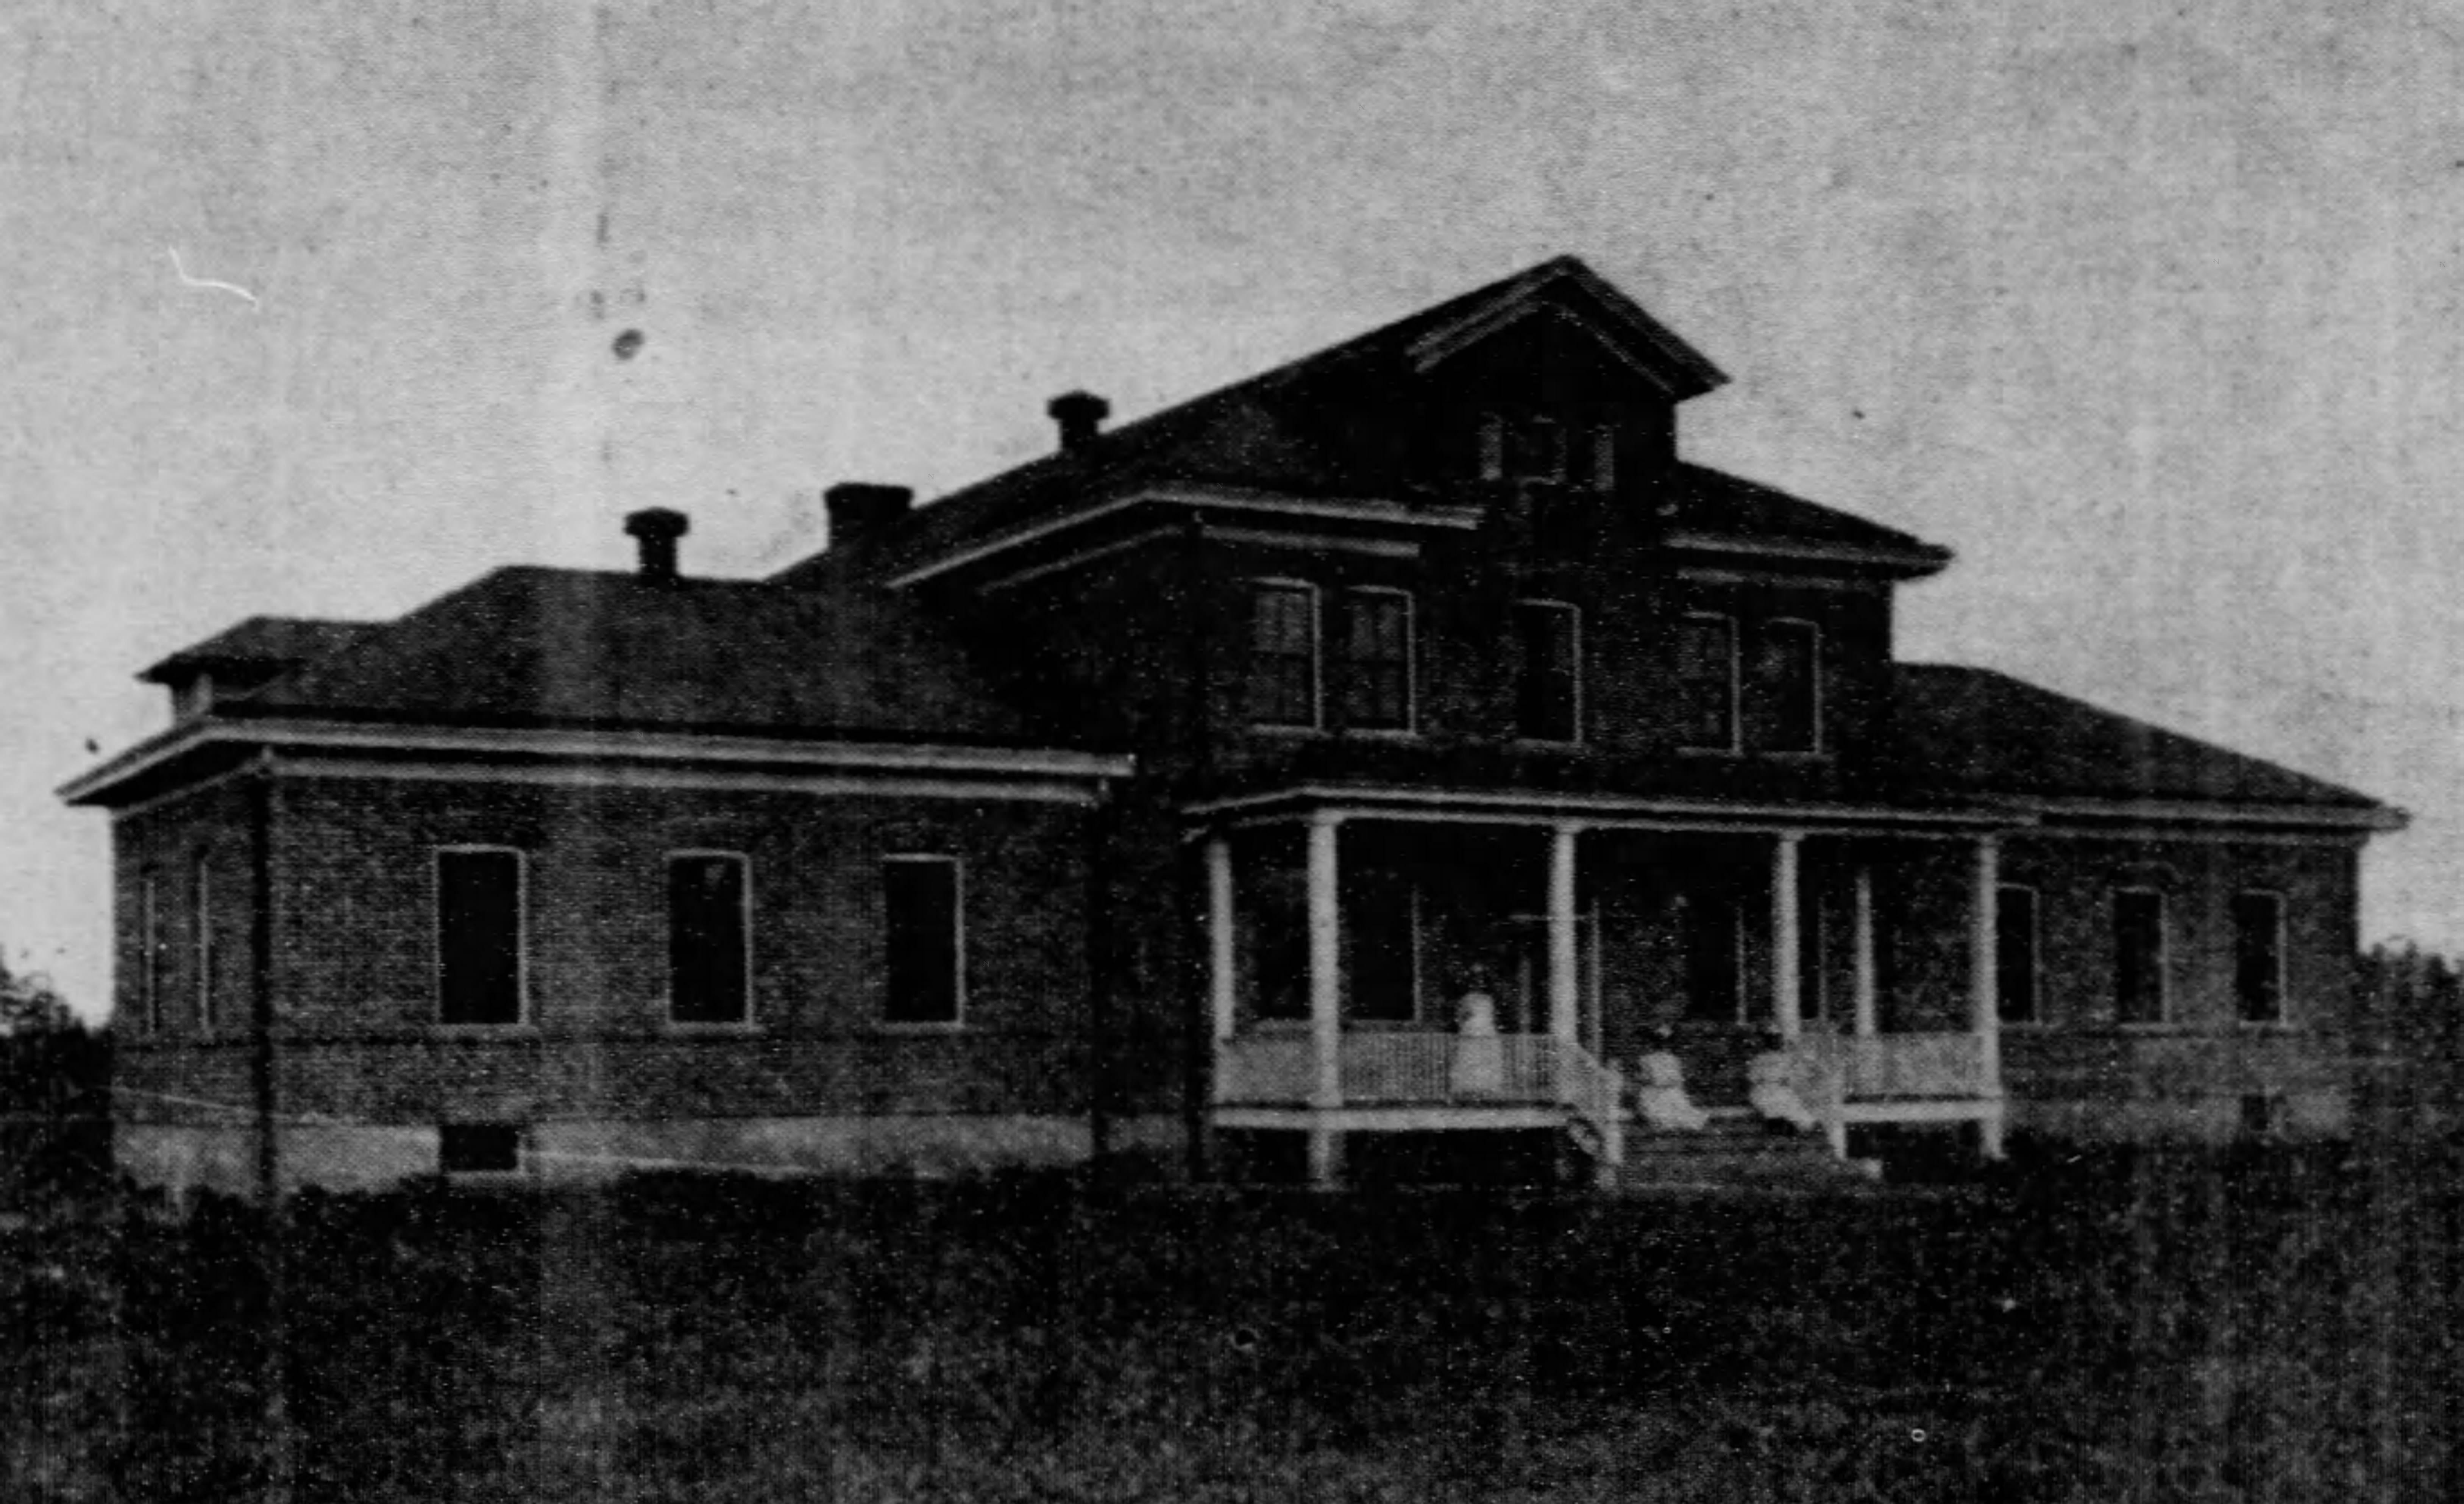 The new hospital opens at Chemawa Indian School in 1907, as published in the Oregon Statesman.